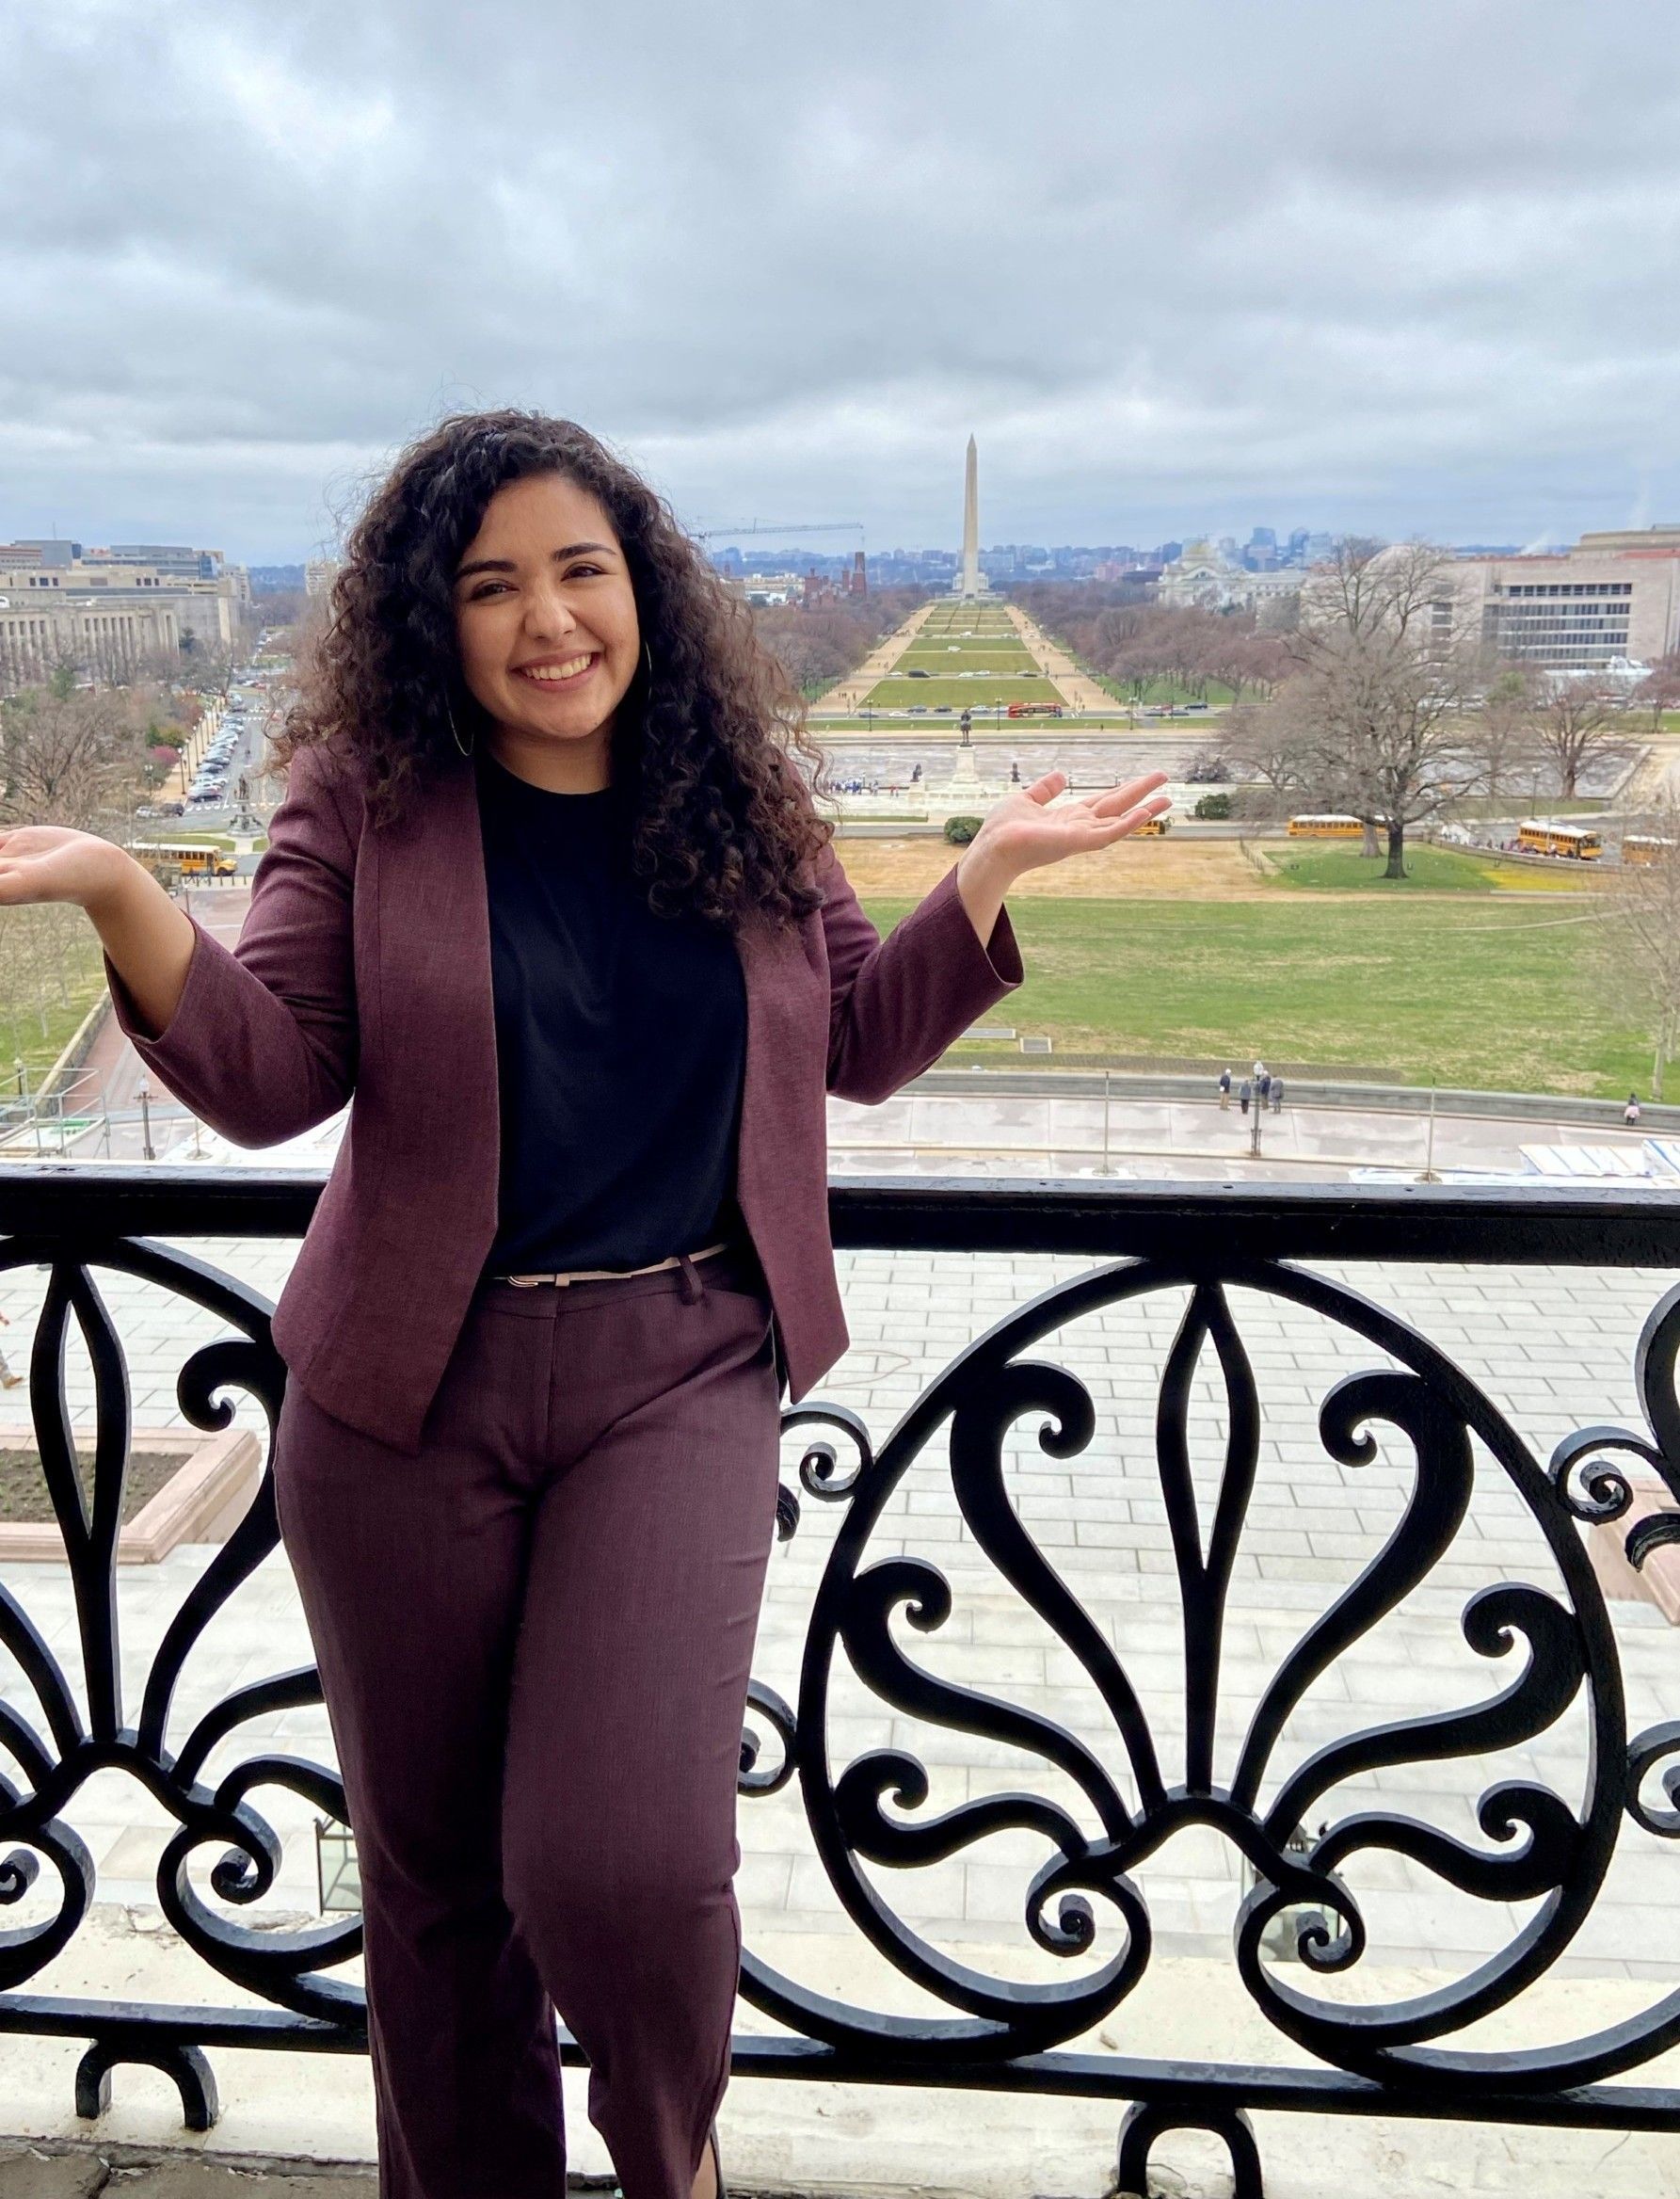 Madison Lopez – Community and Human Rights Advocate